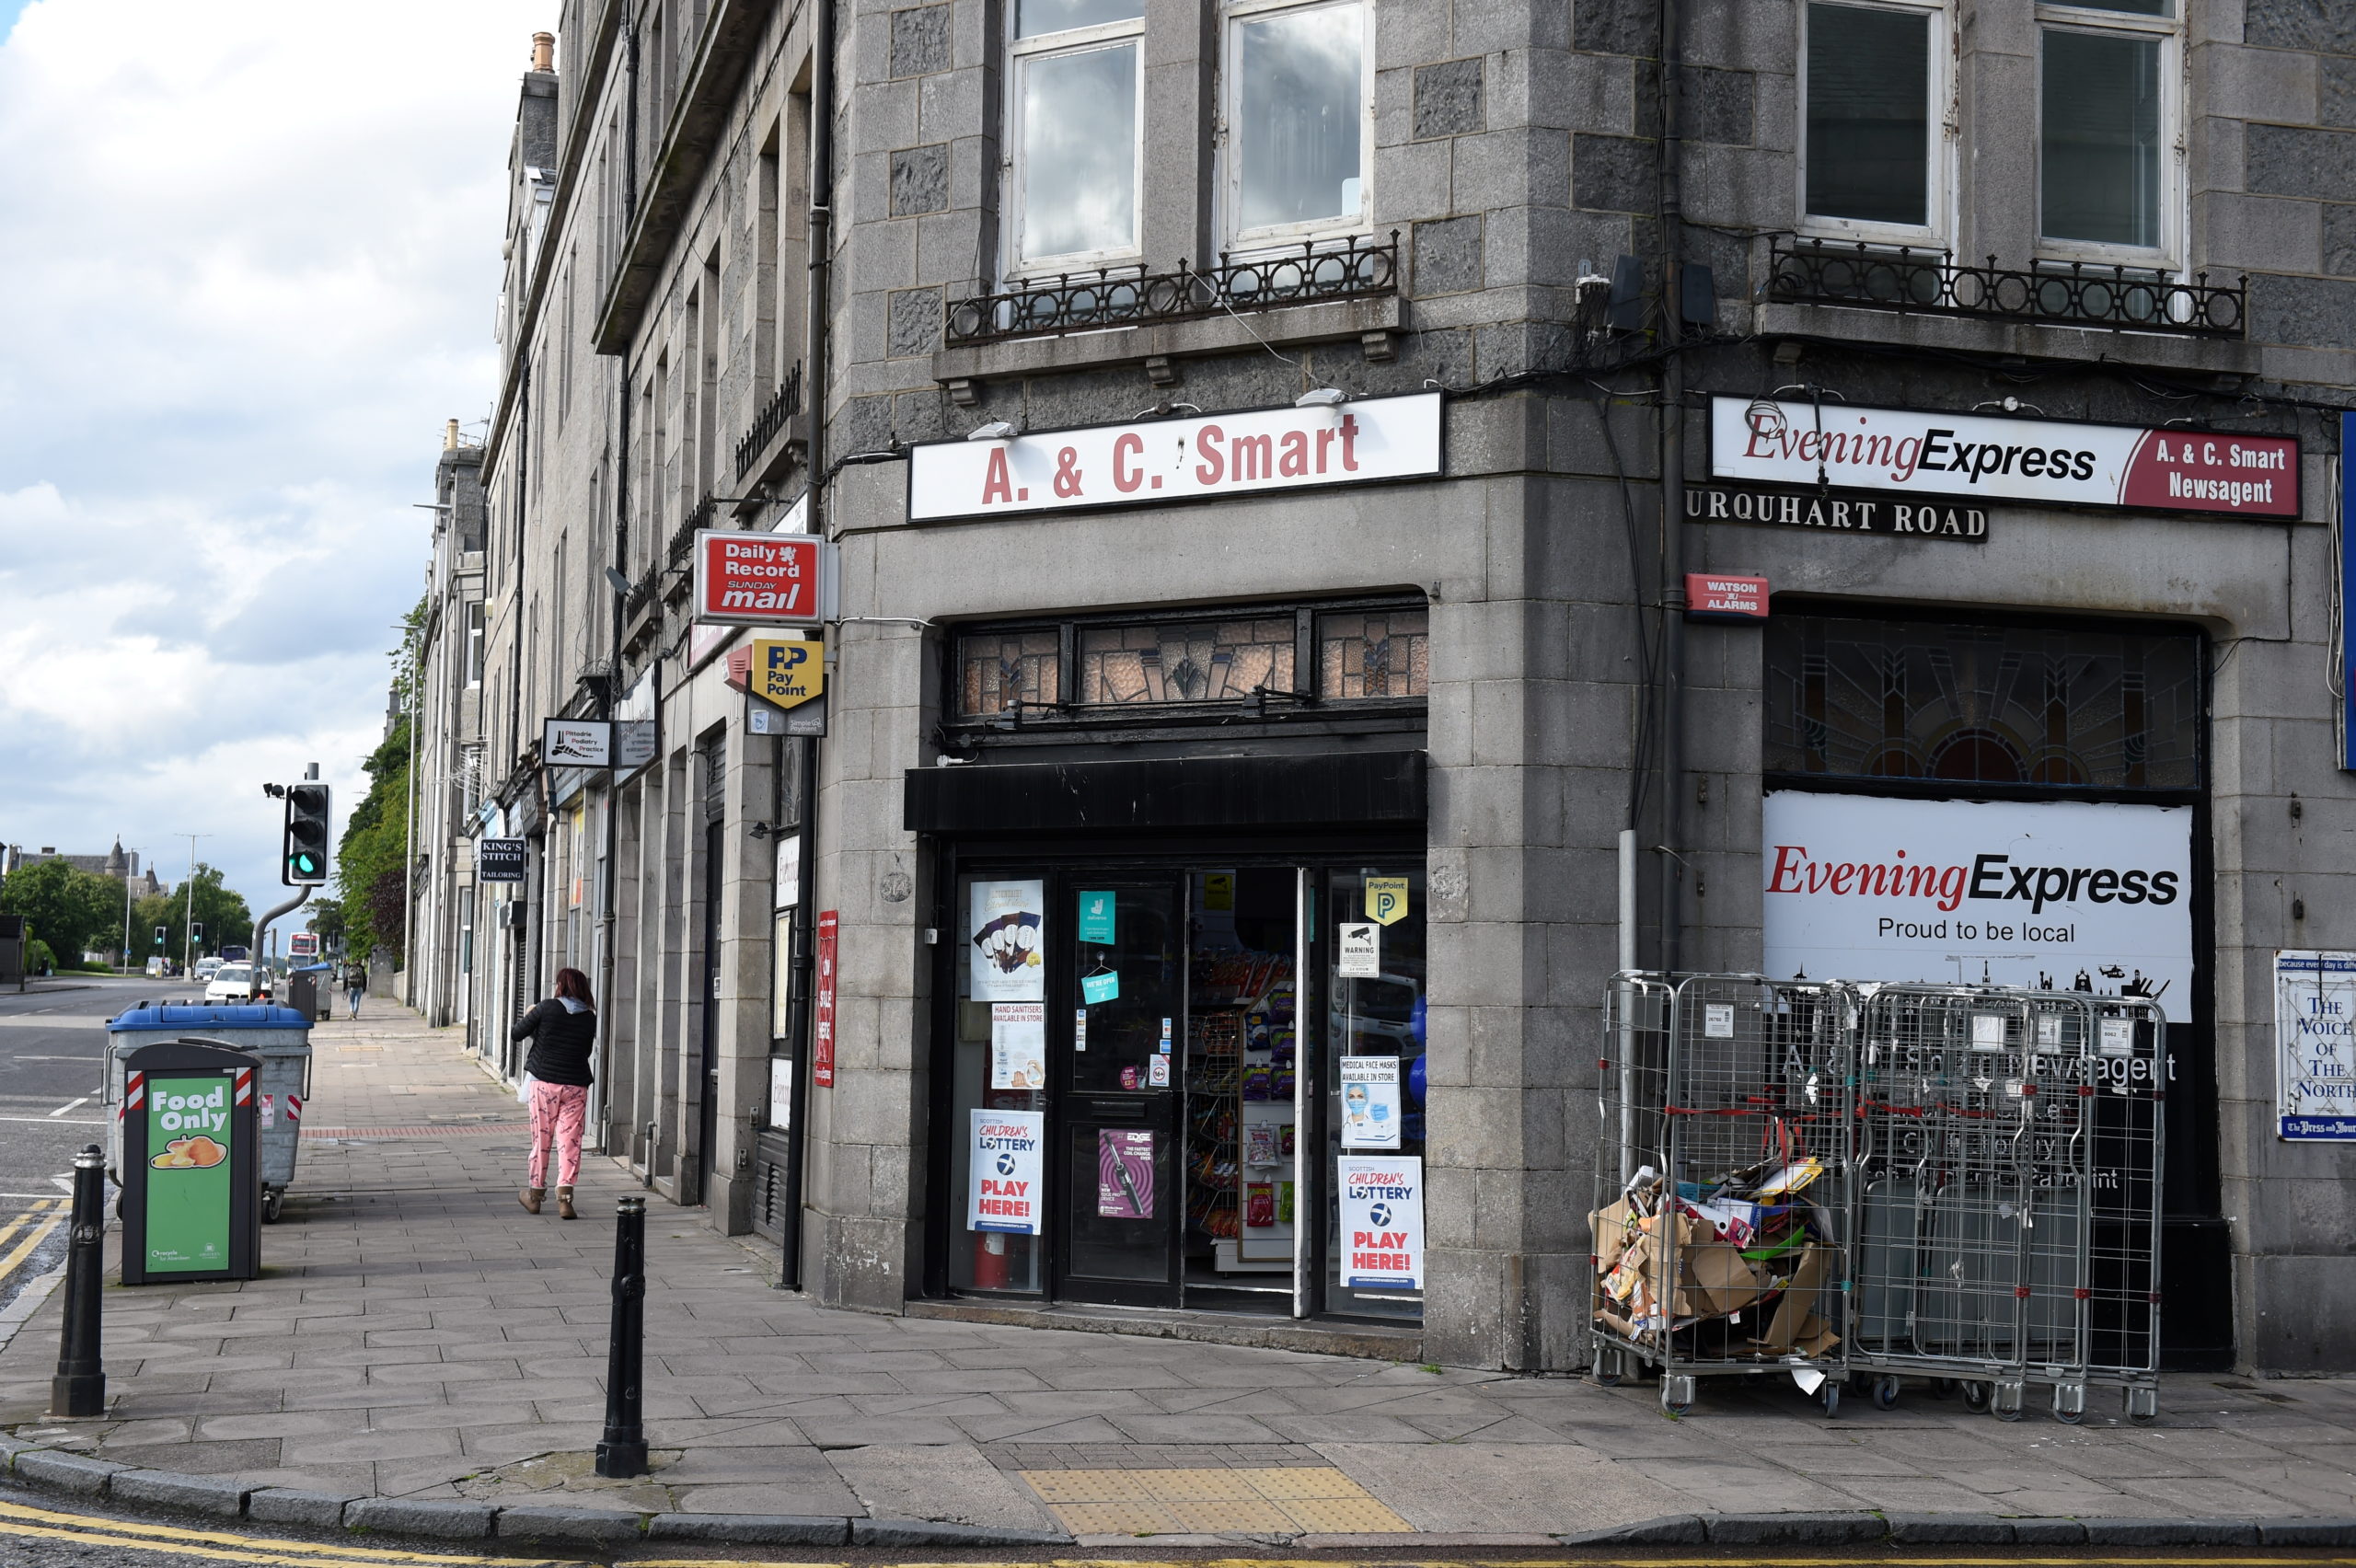 The cash machine is located outside of A&C Smart newsagents, at the junction of Urquhart Road and King Street